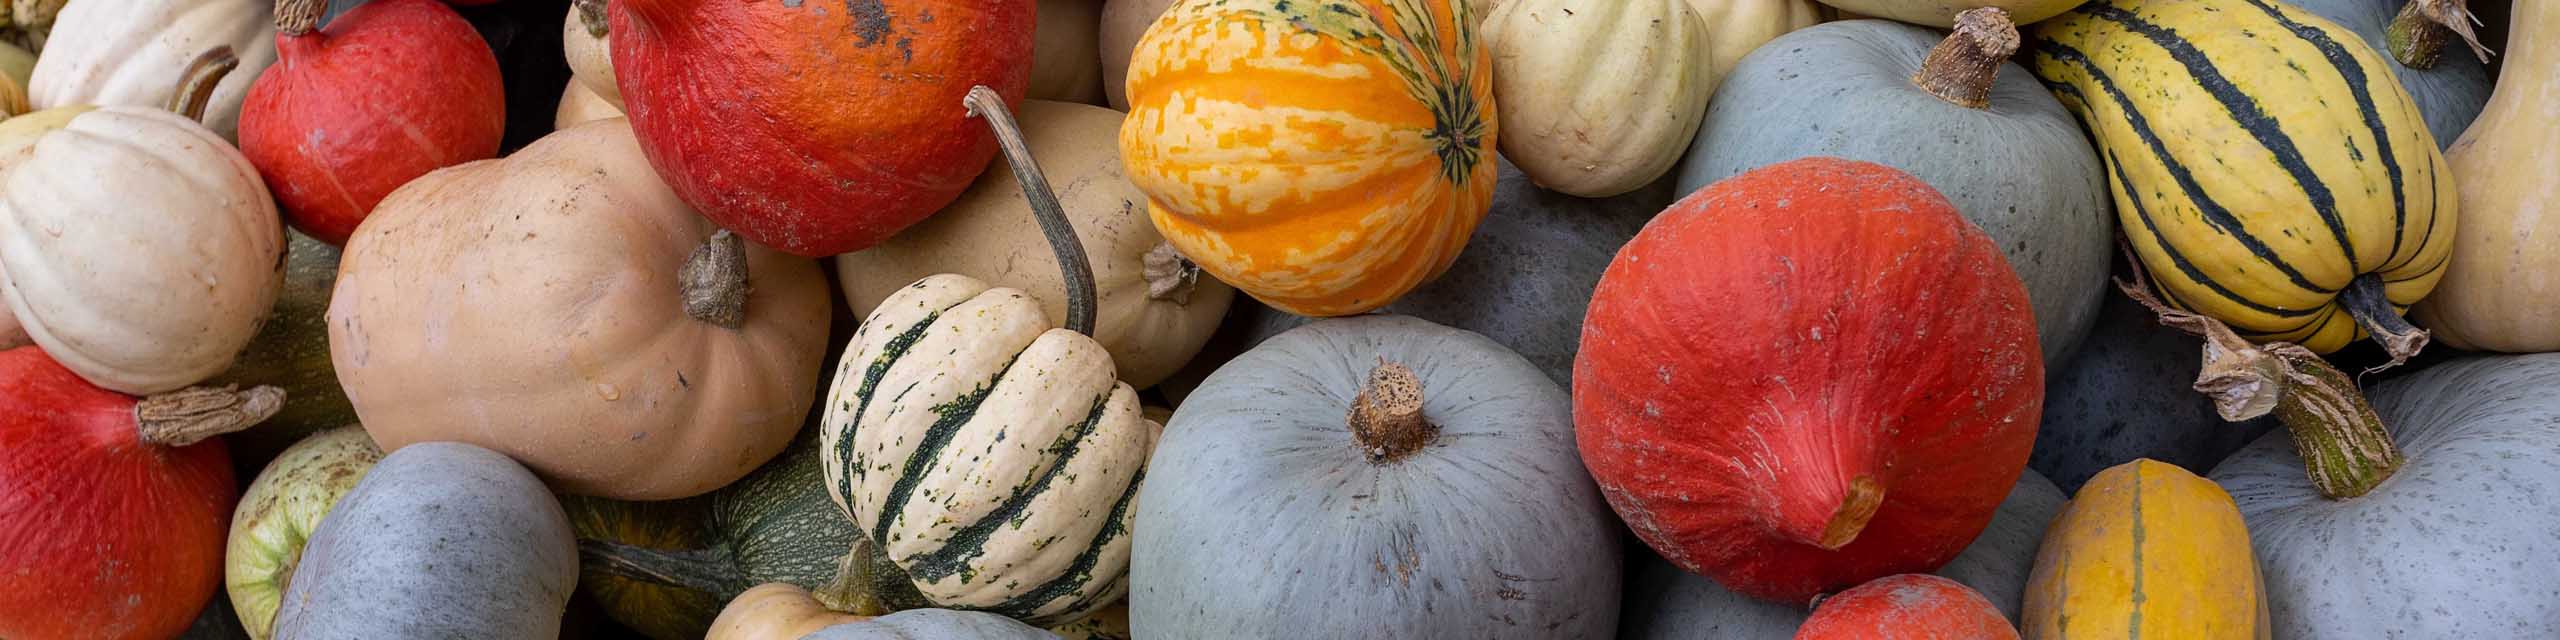 Top down view of different colors and types of winter squash.